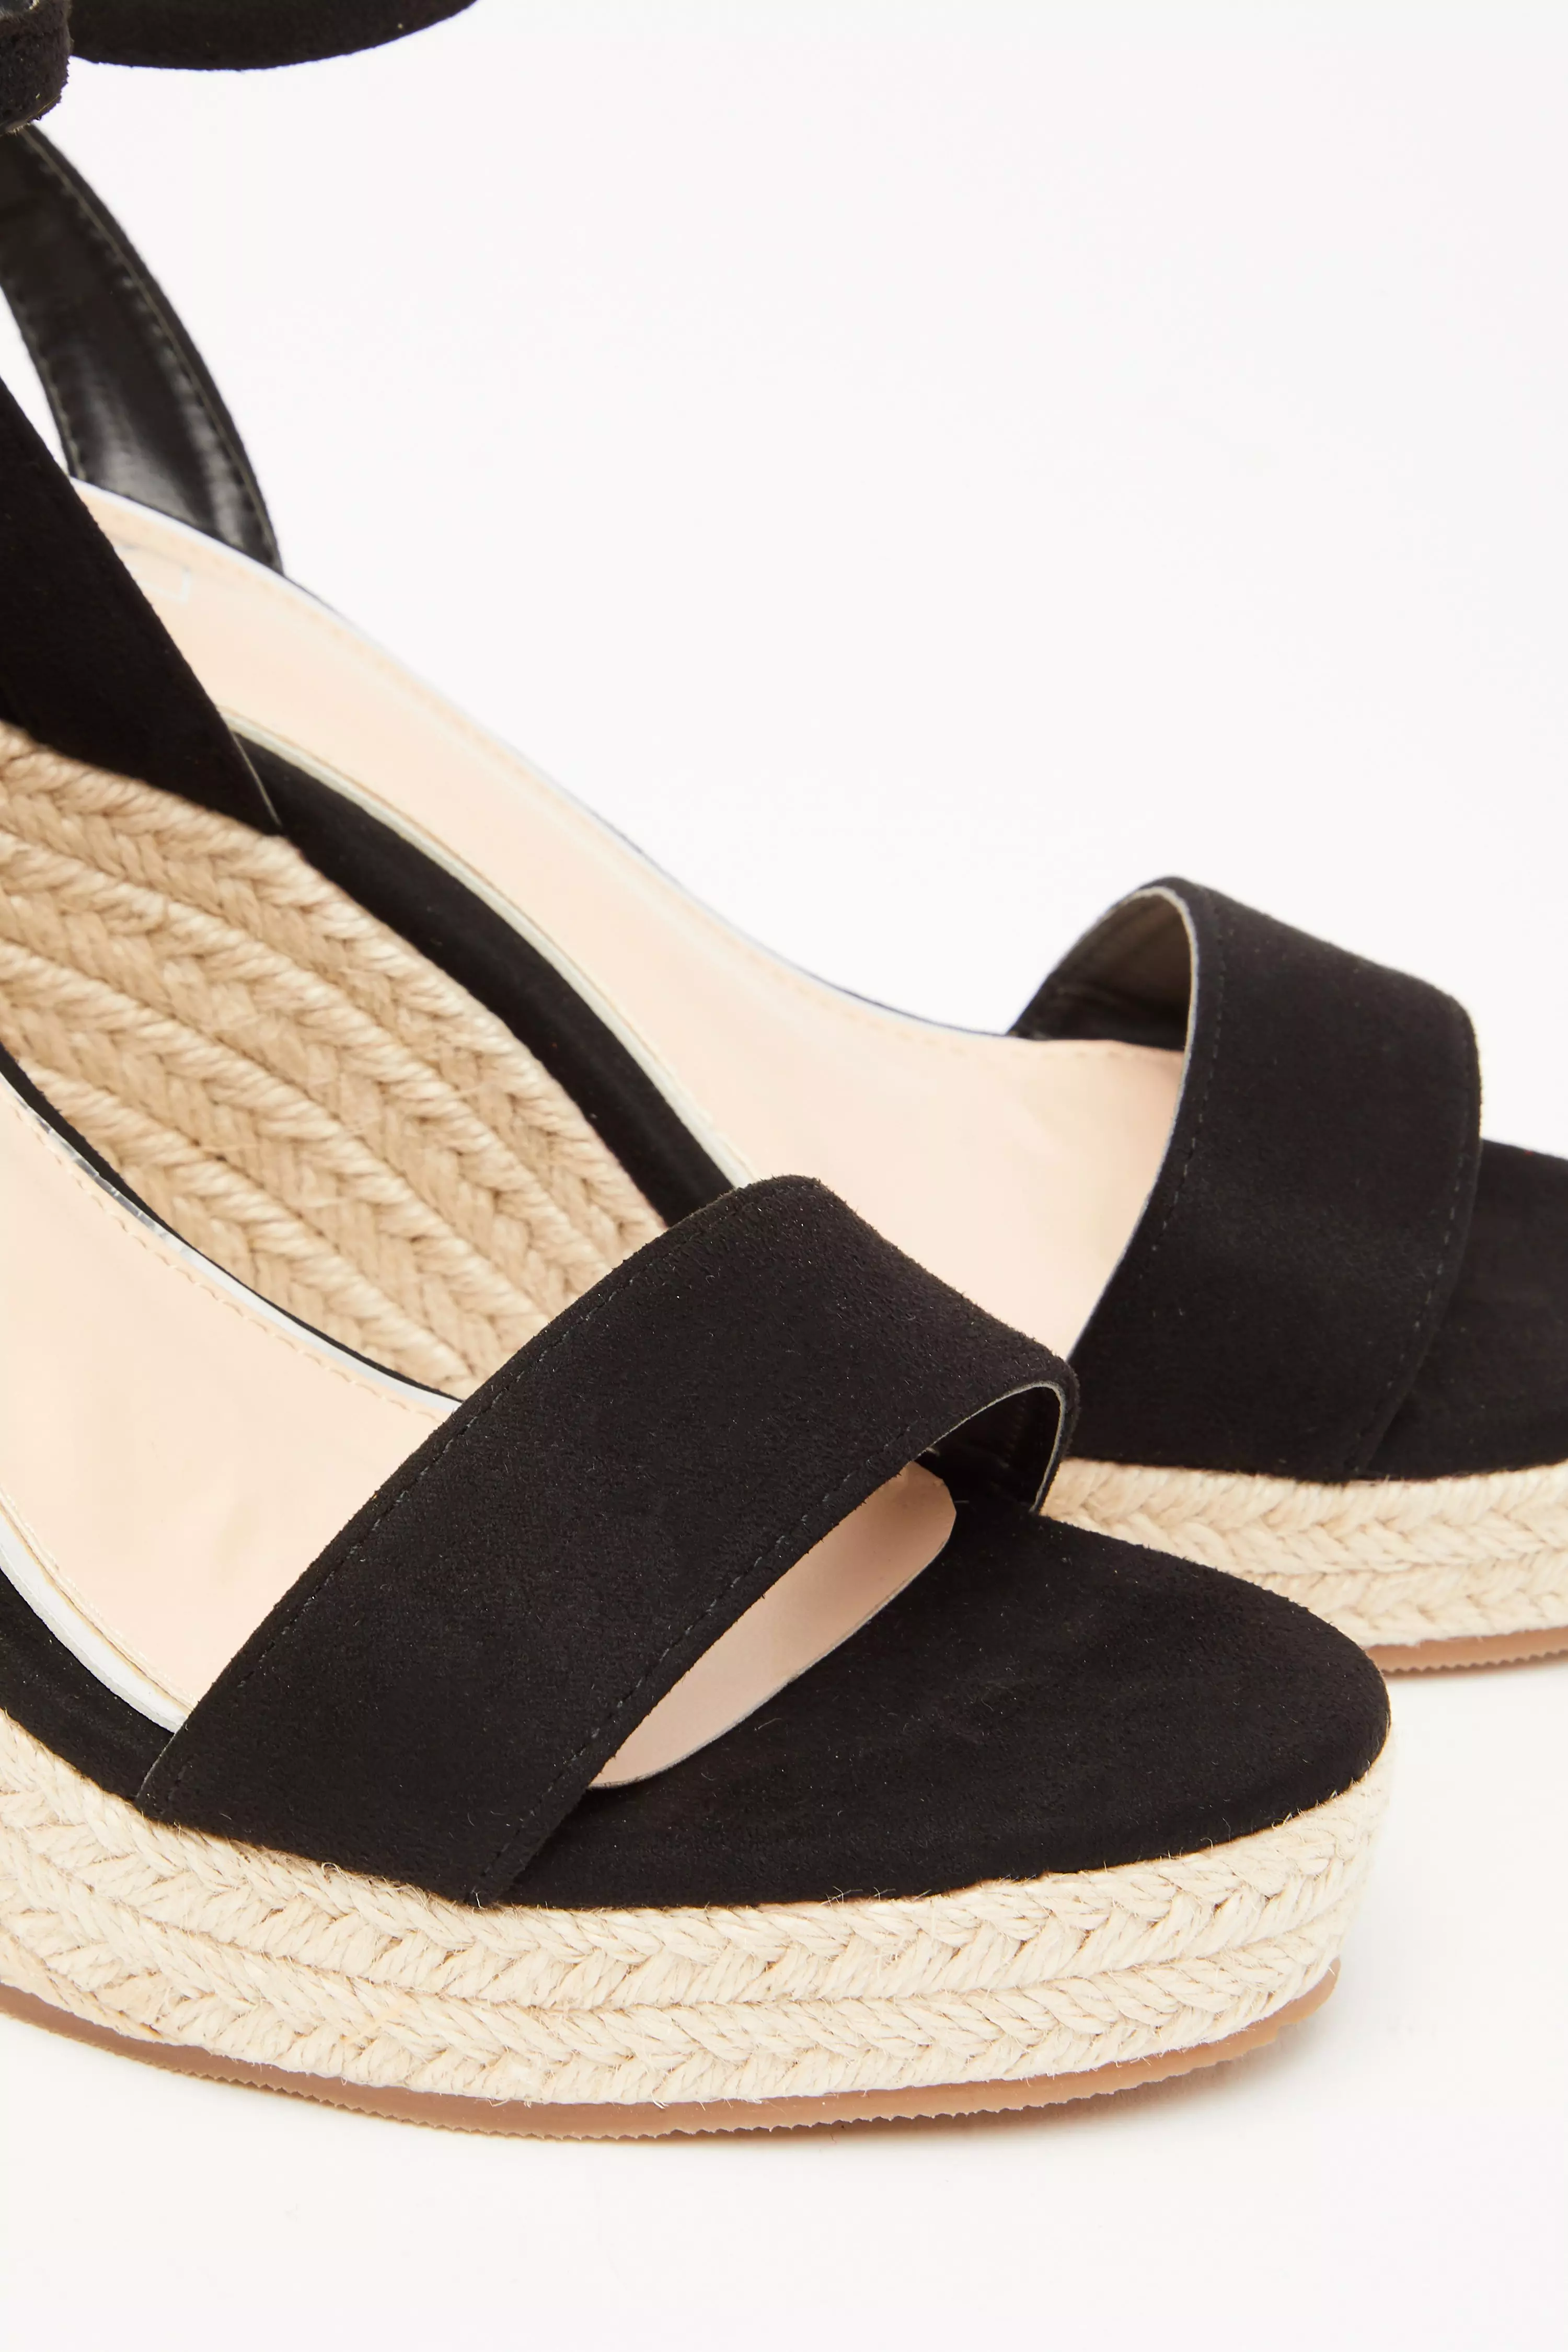 Black Woven Wedges